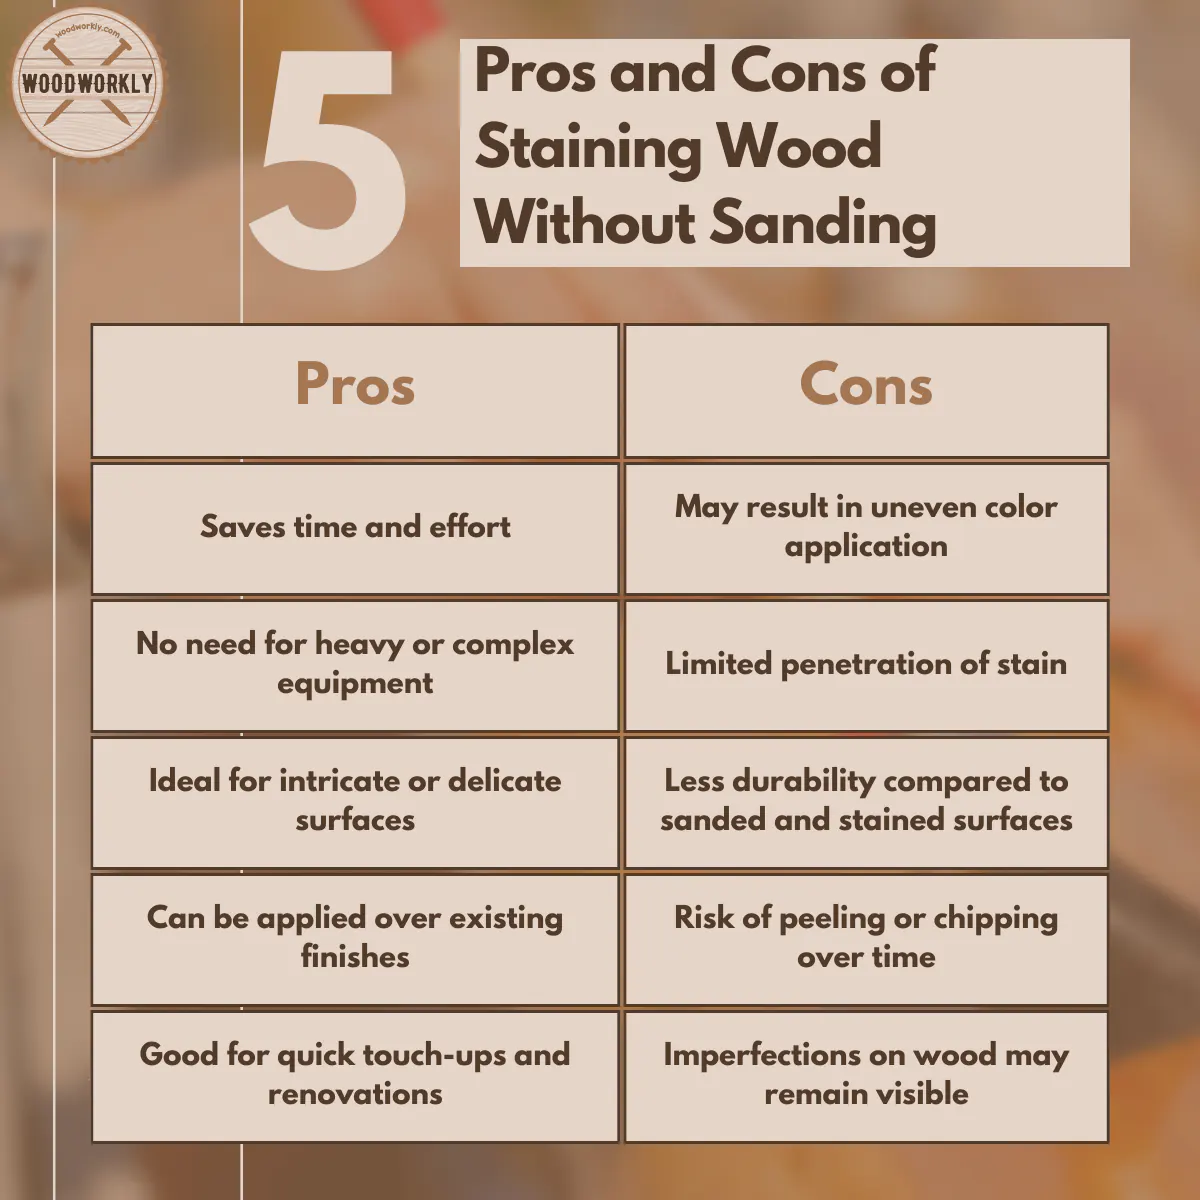 Pros and Cons of Staining Wood Without Sanding